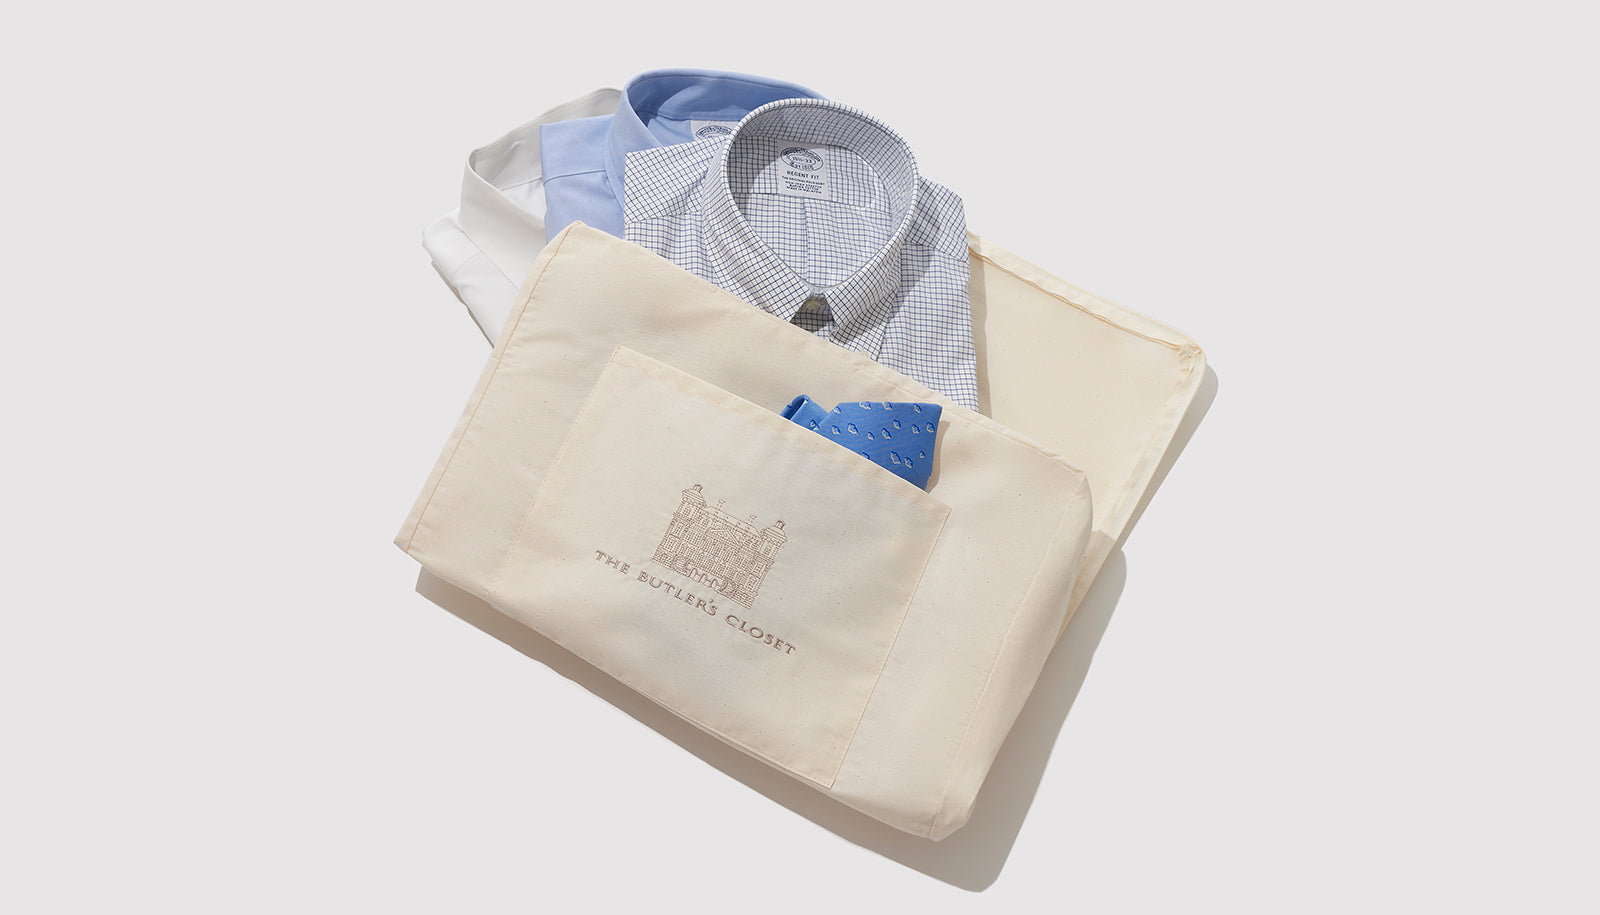 Cotton Storage Bag For Garments With Three Shirts And A Tie Sticking Out Of It